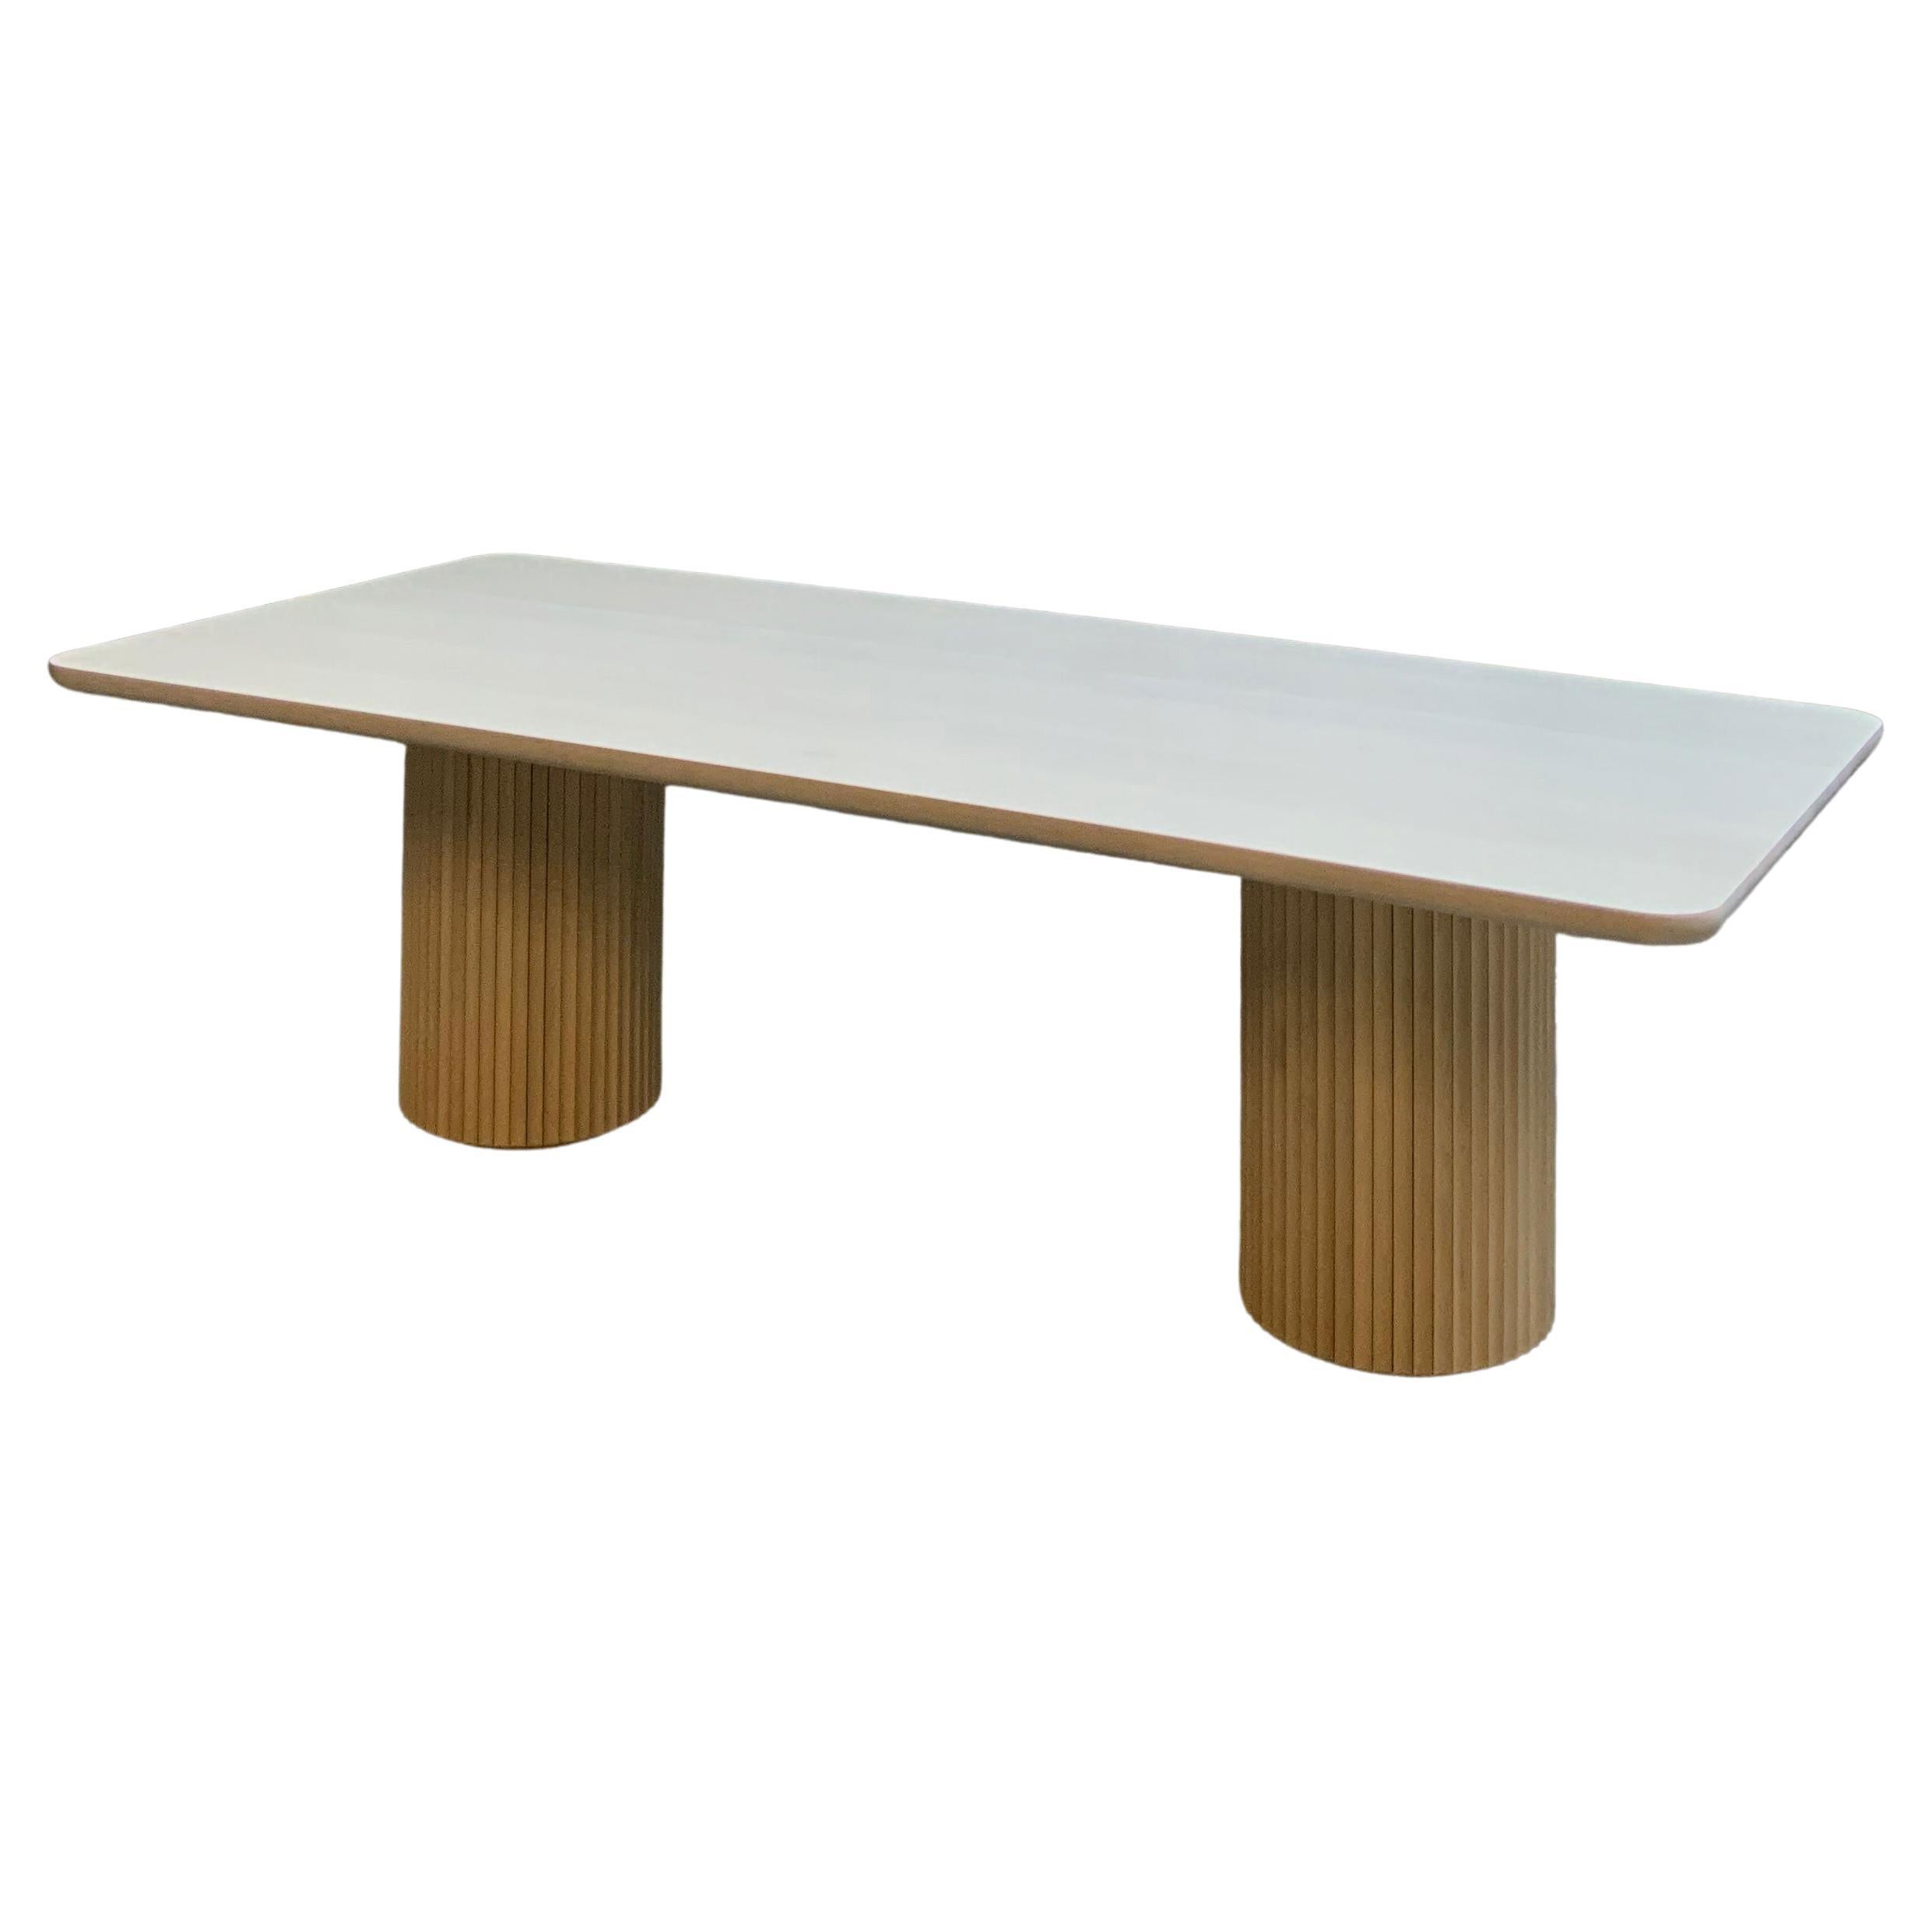 The Pilar Dining Table exudes a sense of subtle elegance and character in the space it inhabits. With a solid wood top and fluted double pedestal base, the table is plenty sturdy without looking heavy. The table seats eight and has enough extra room